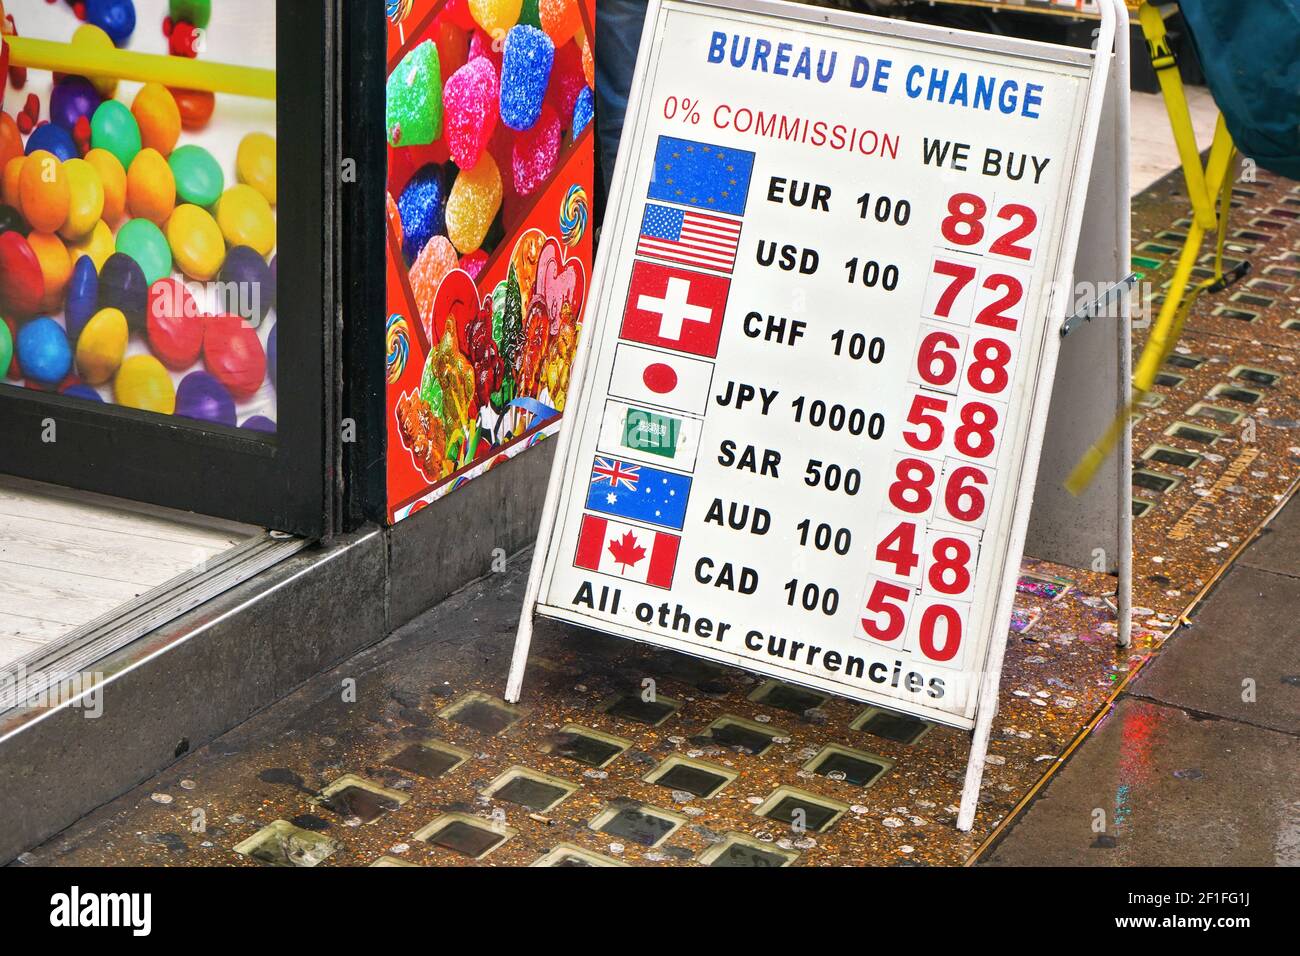 London, United Kingdom - February 01, 2019: Currency exchange rates table in front of Bureau the change office at central London. These are usually si Stock Photo